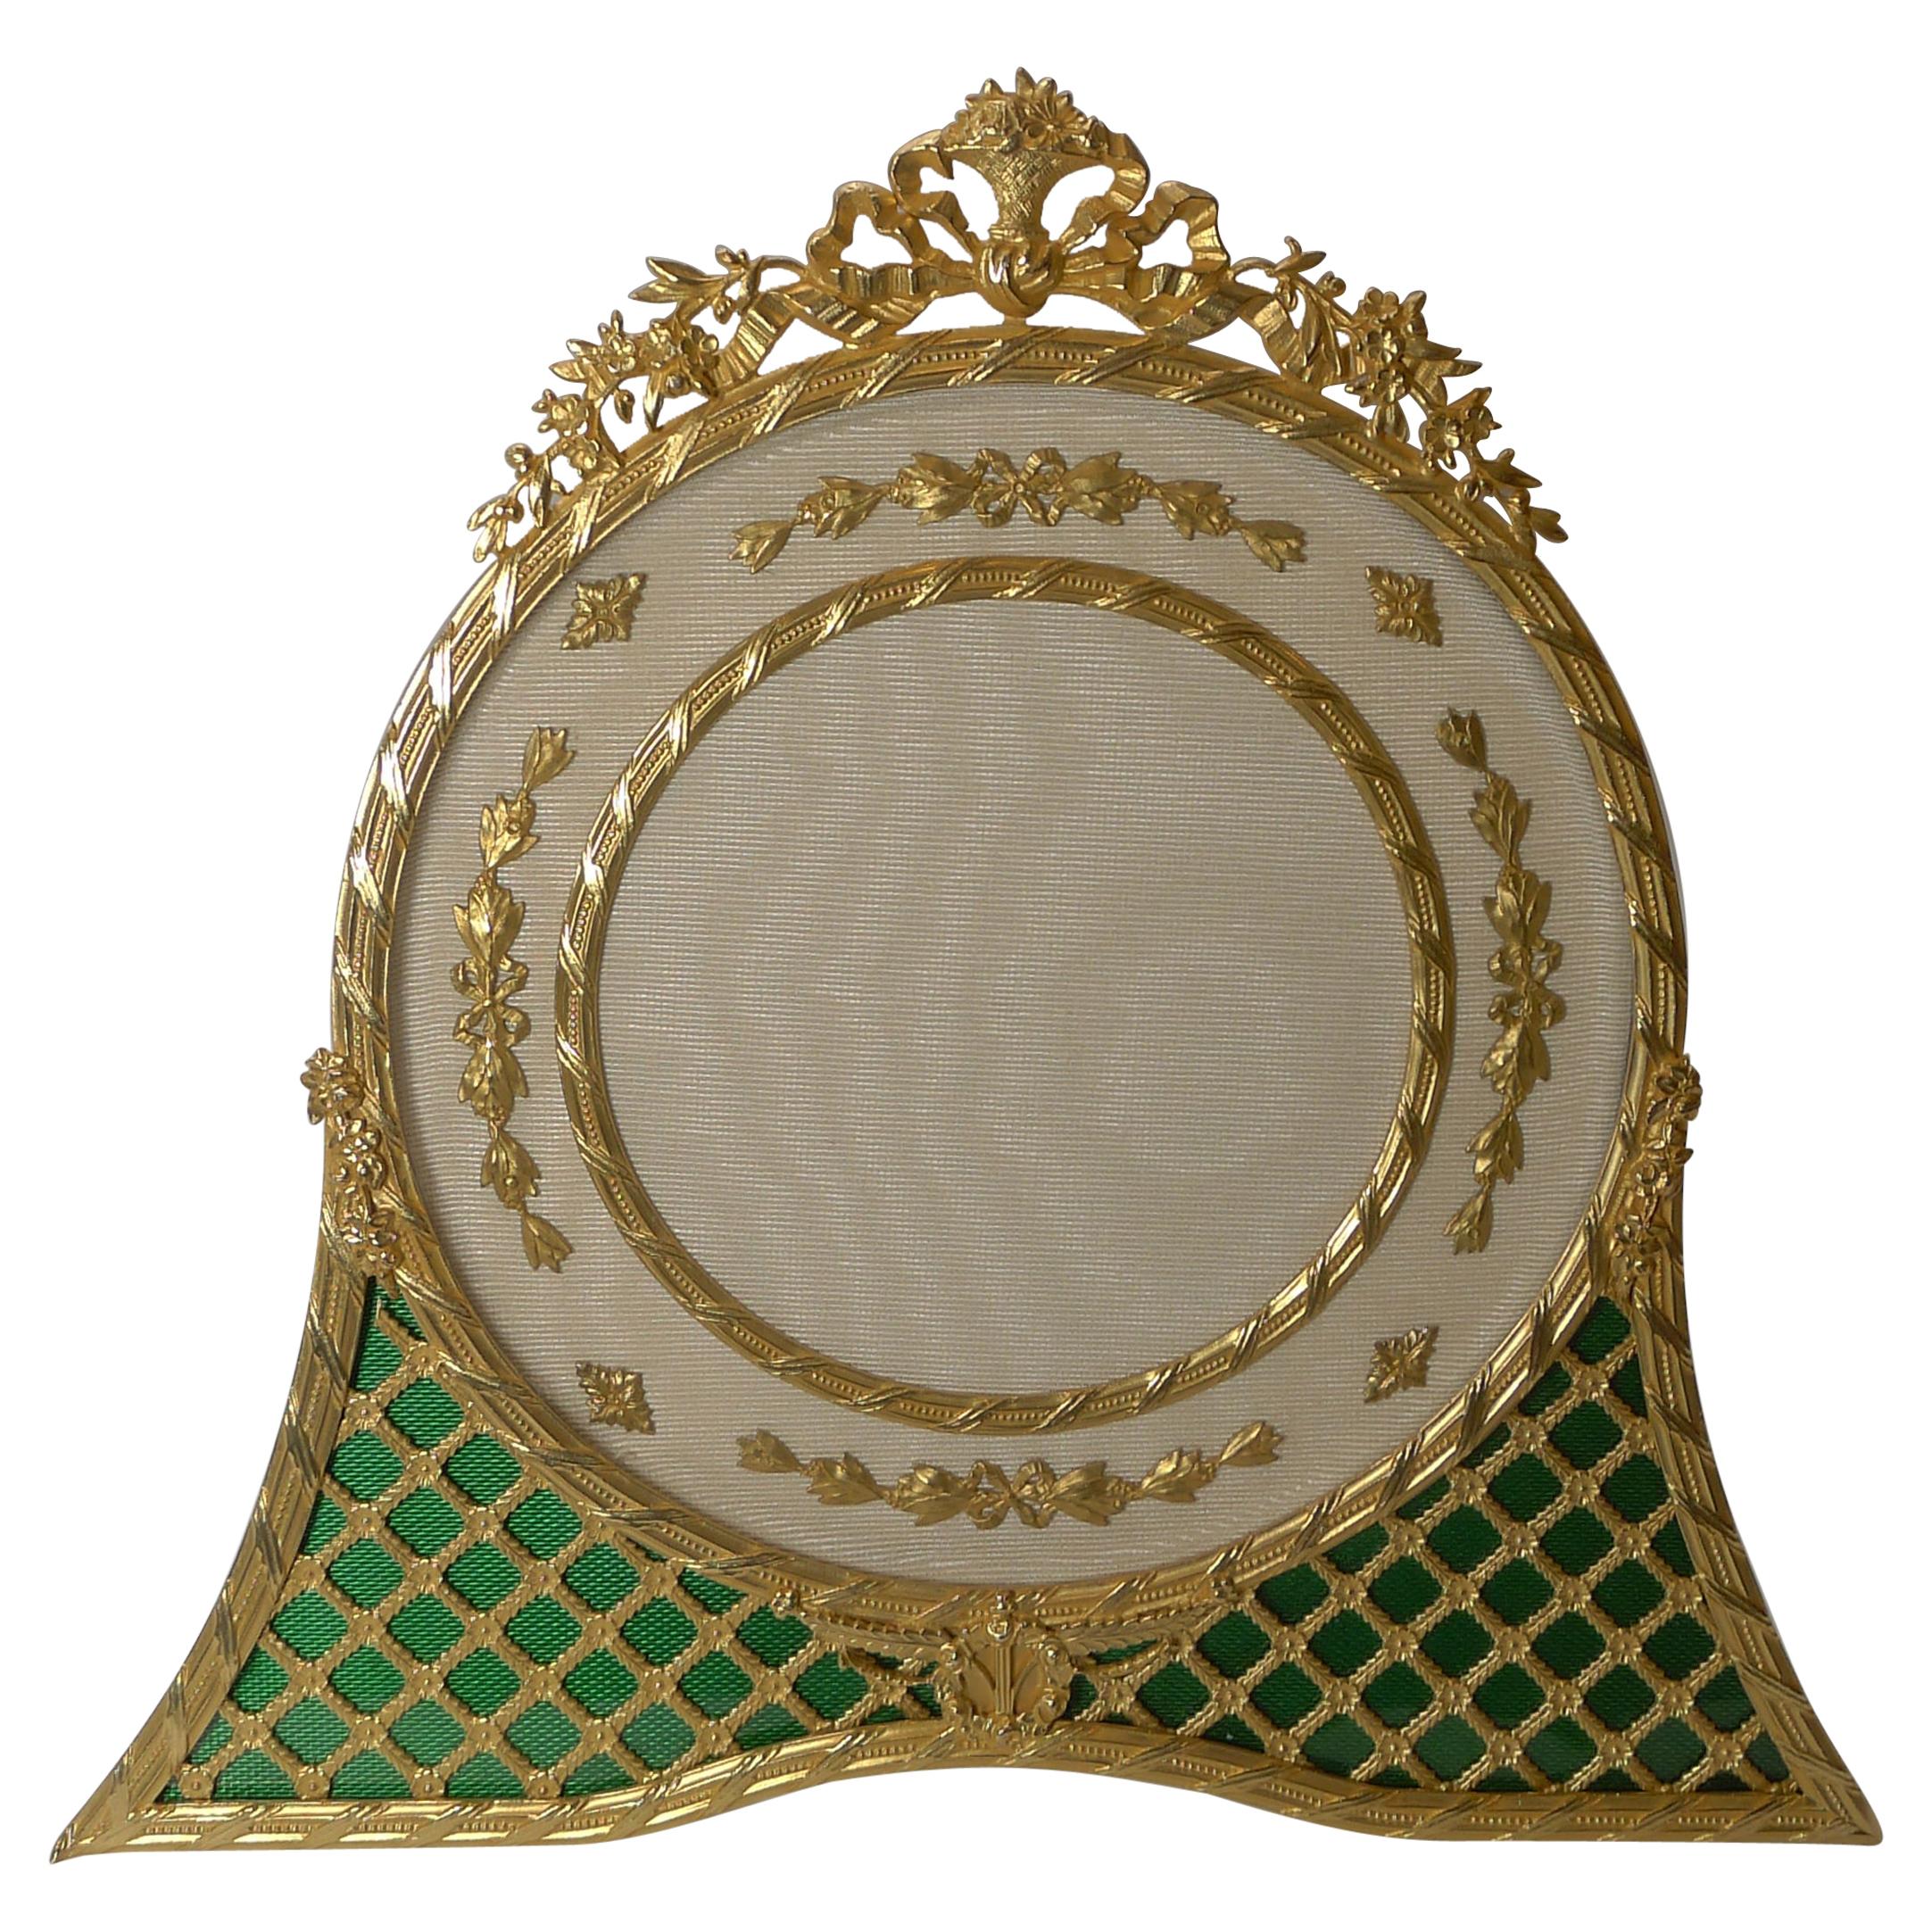 Magnificent French Gilded Bronze & Enamel Picture Frame, c.1900